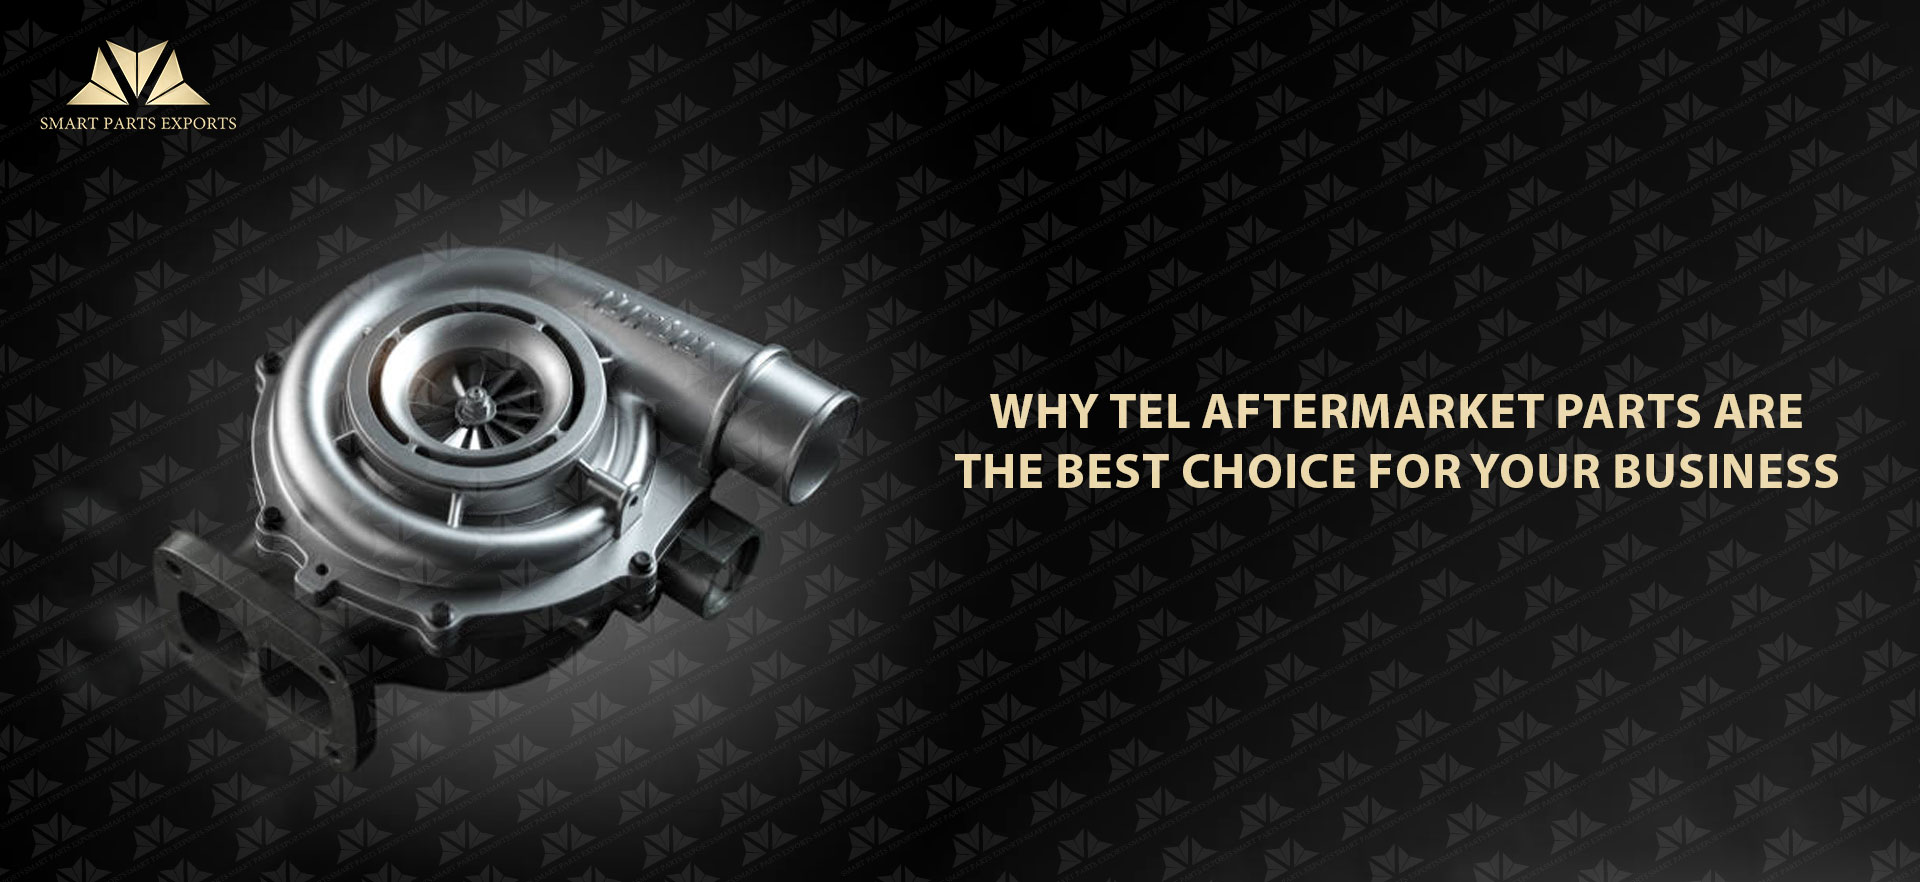 Why TEL Aftermarket Parts are the Best Choice for Your Business